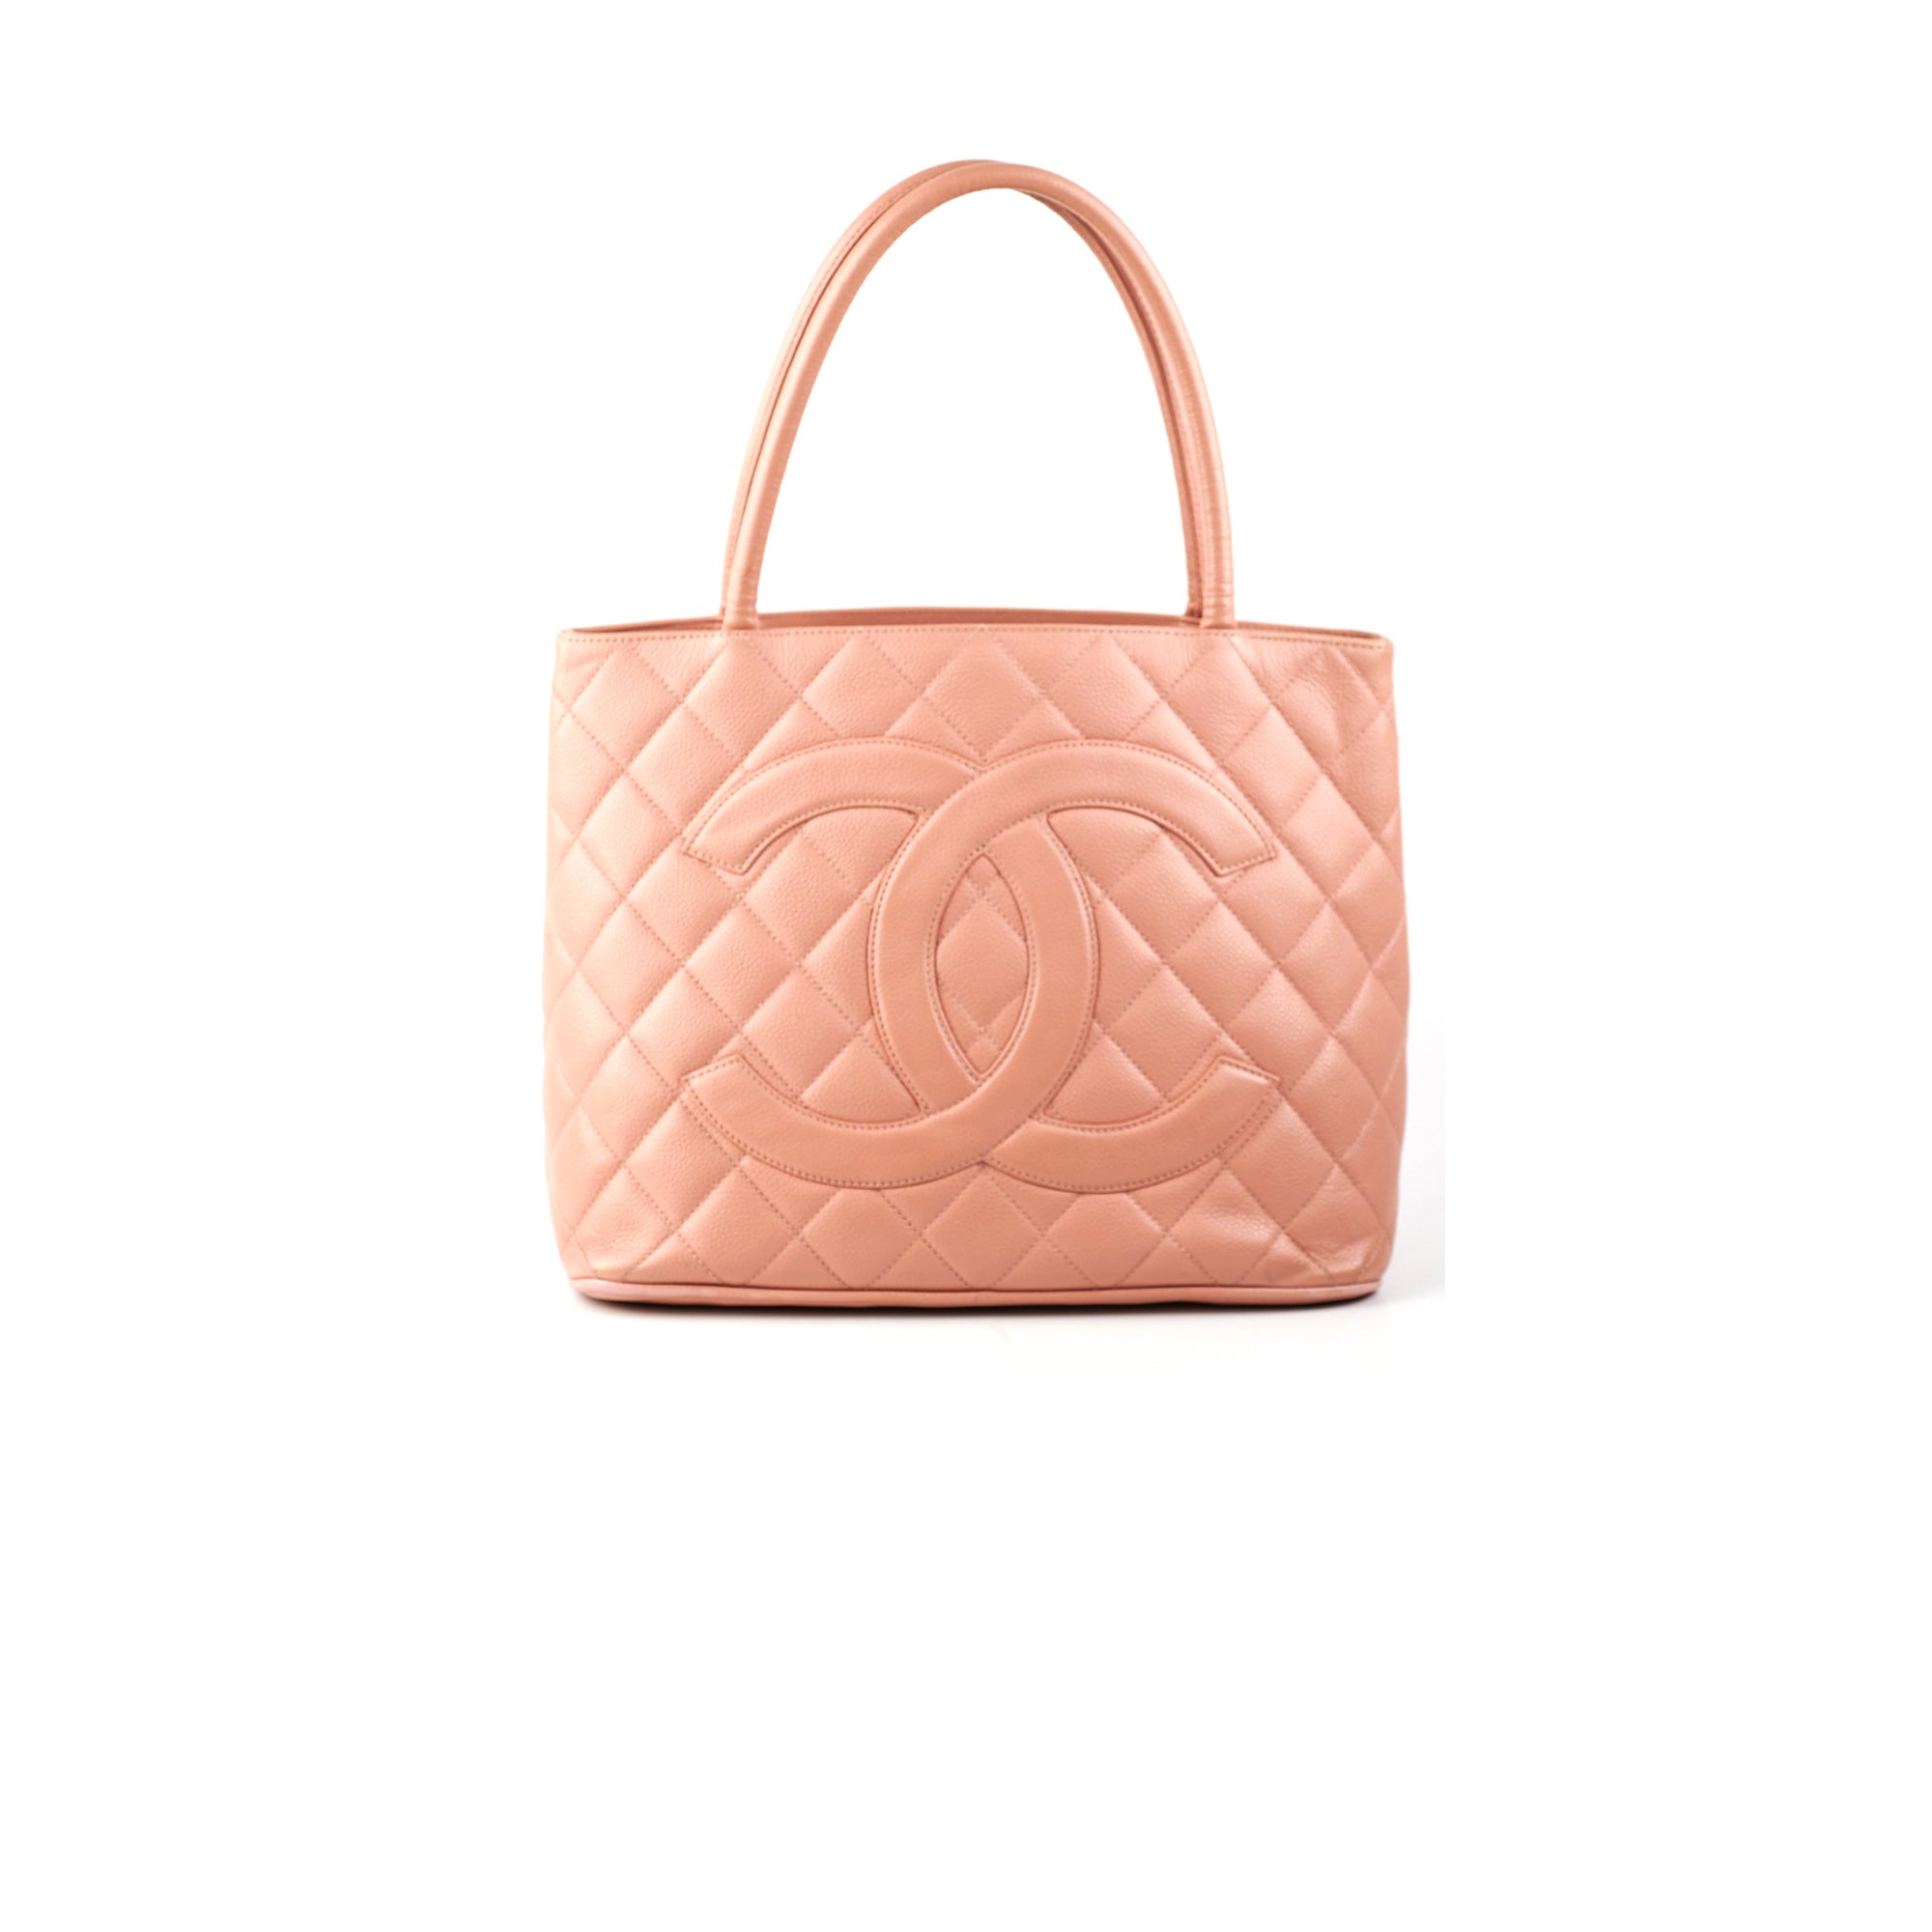 FWRD Renew Chanel Medallion Tote in Pink